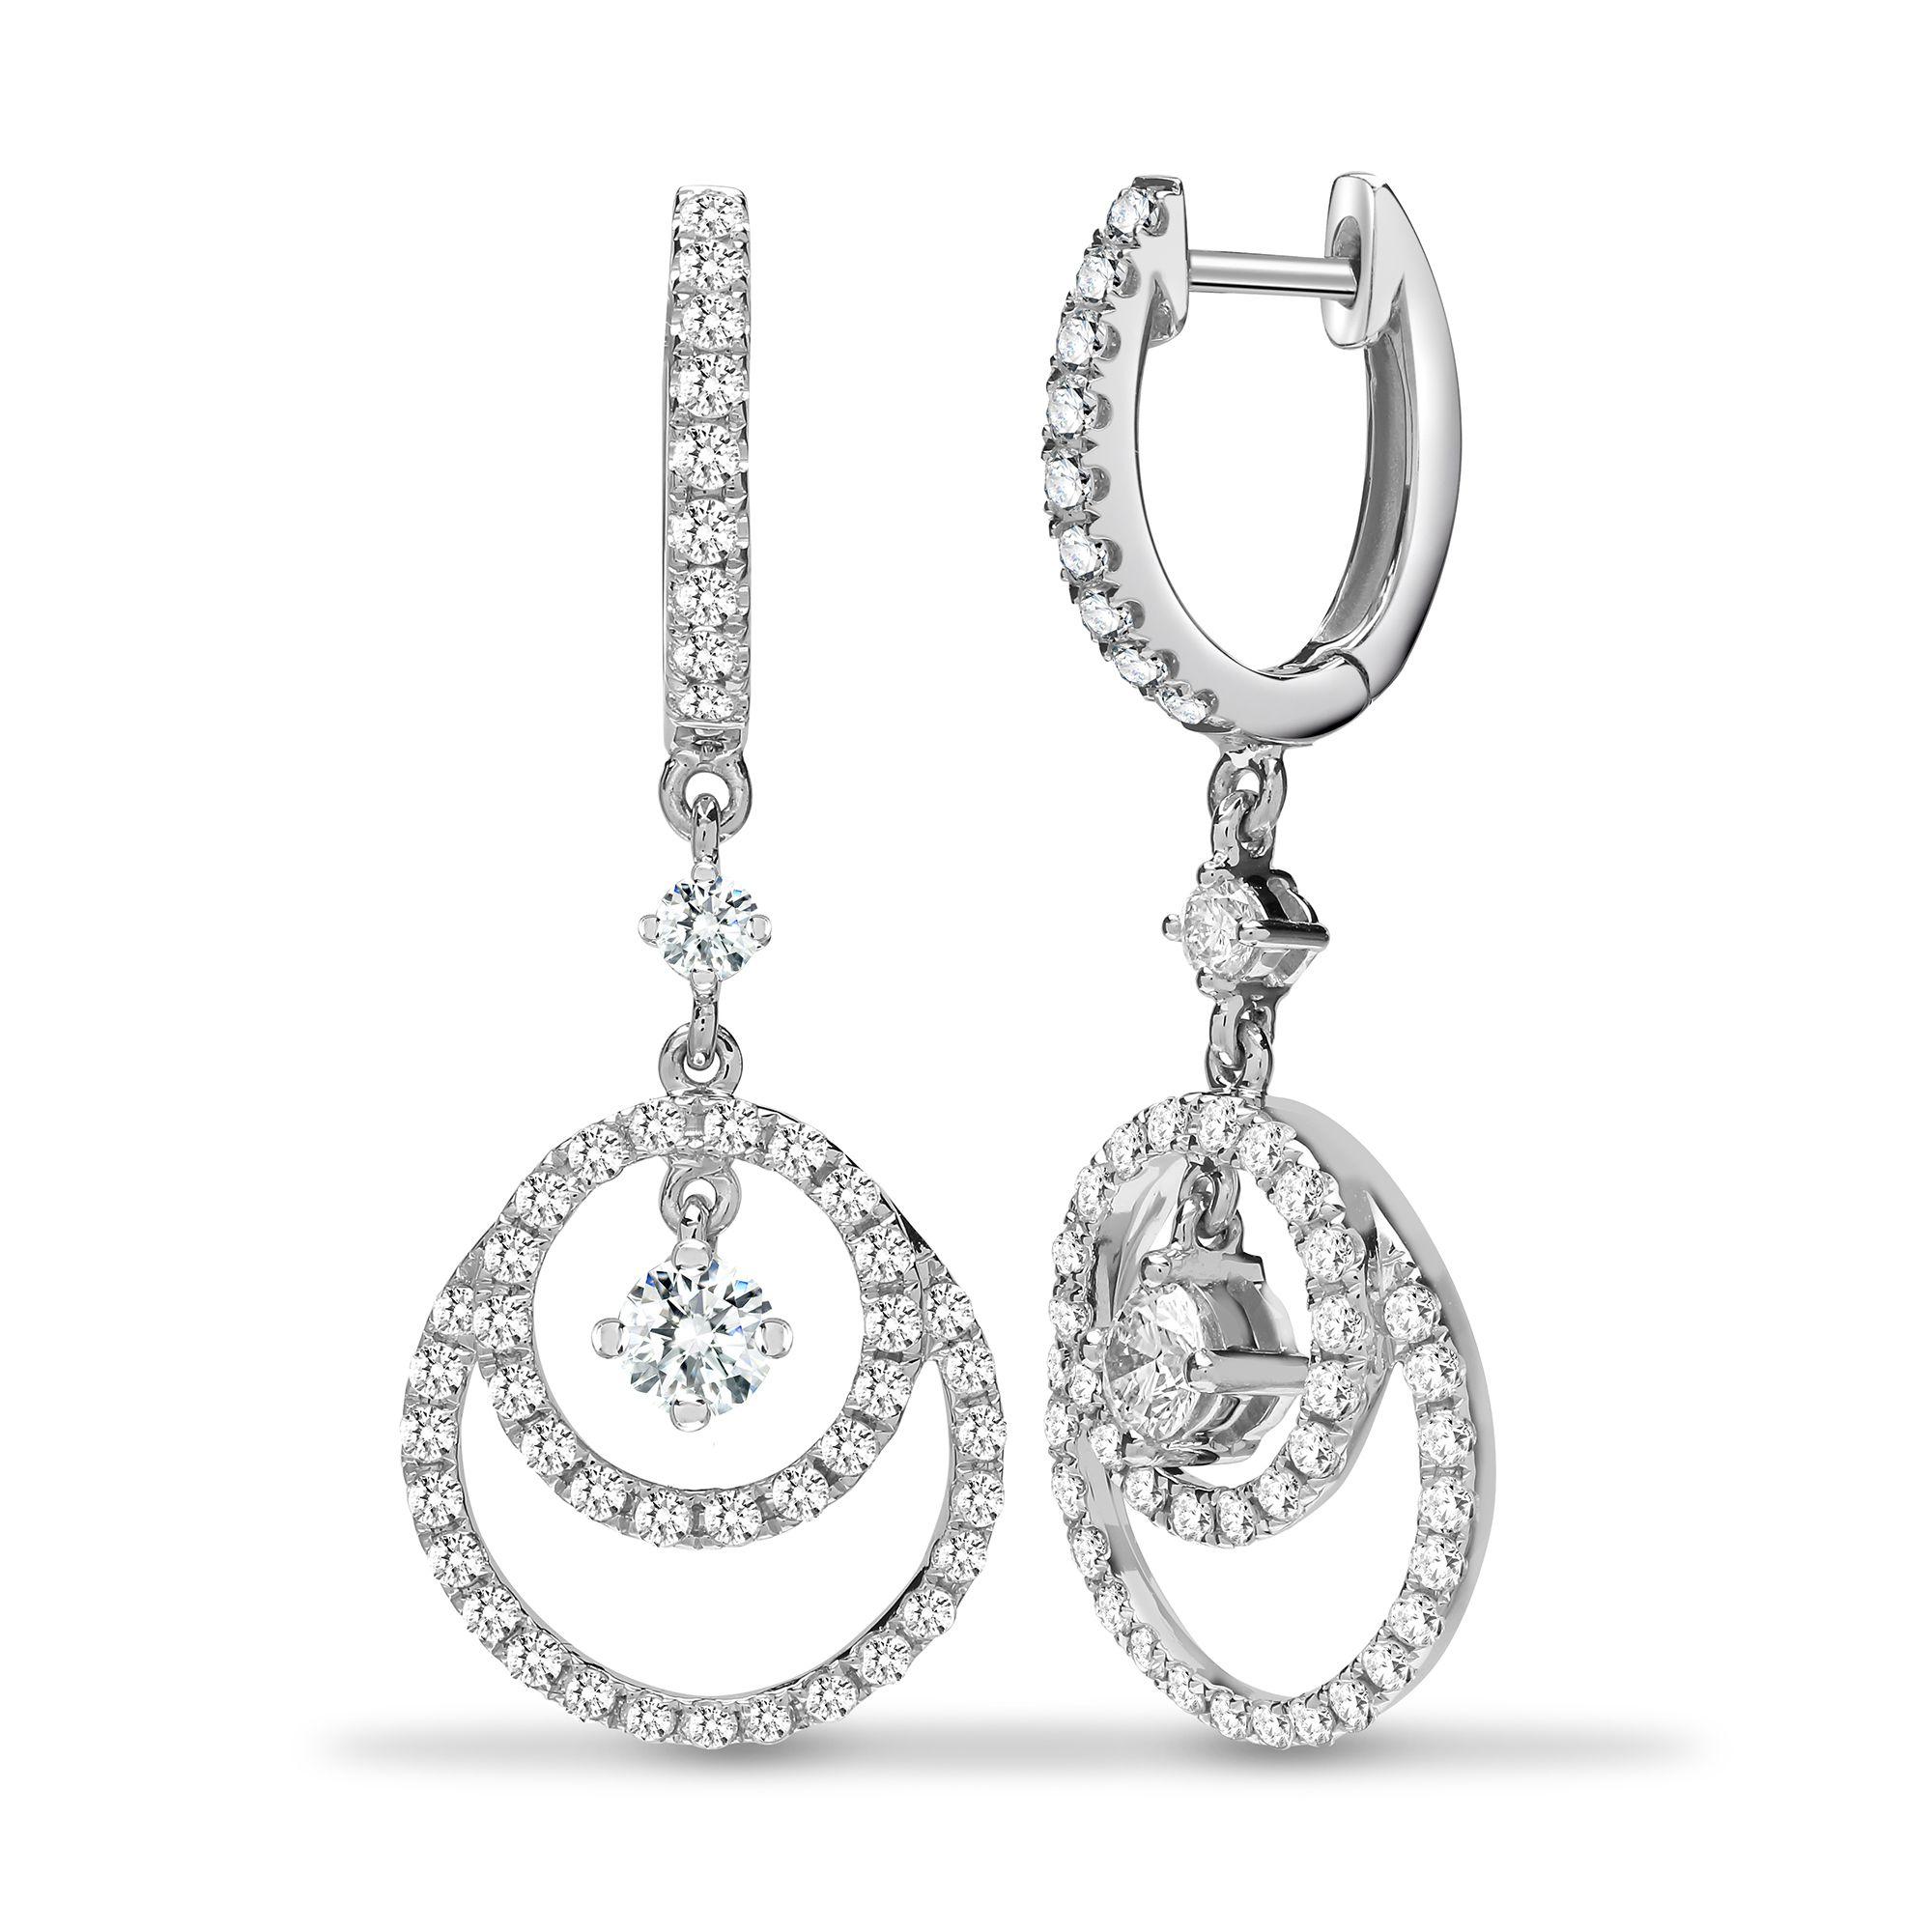 Description
18ct White 1.01ct Diamond Drop Earrings

Details
Gram: 3.4

Metal Type: 18ct Gold

Metal Colour: White

Total Diamond Weight: 1.01ct

Stone Colour 1: G

Stone Clarity 1: SI1

Width: 12mm

Height: 30mm

Total Stone Weight: